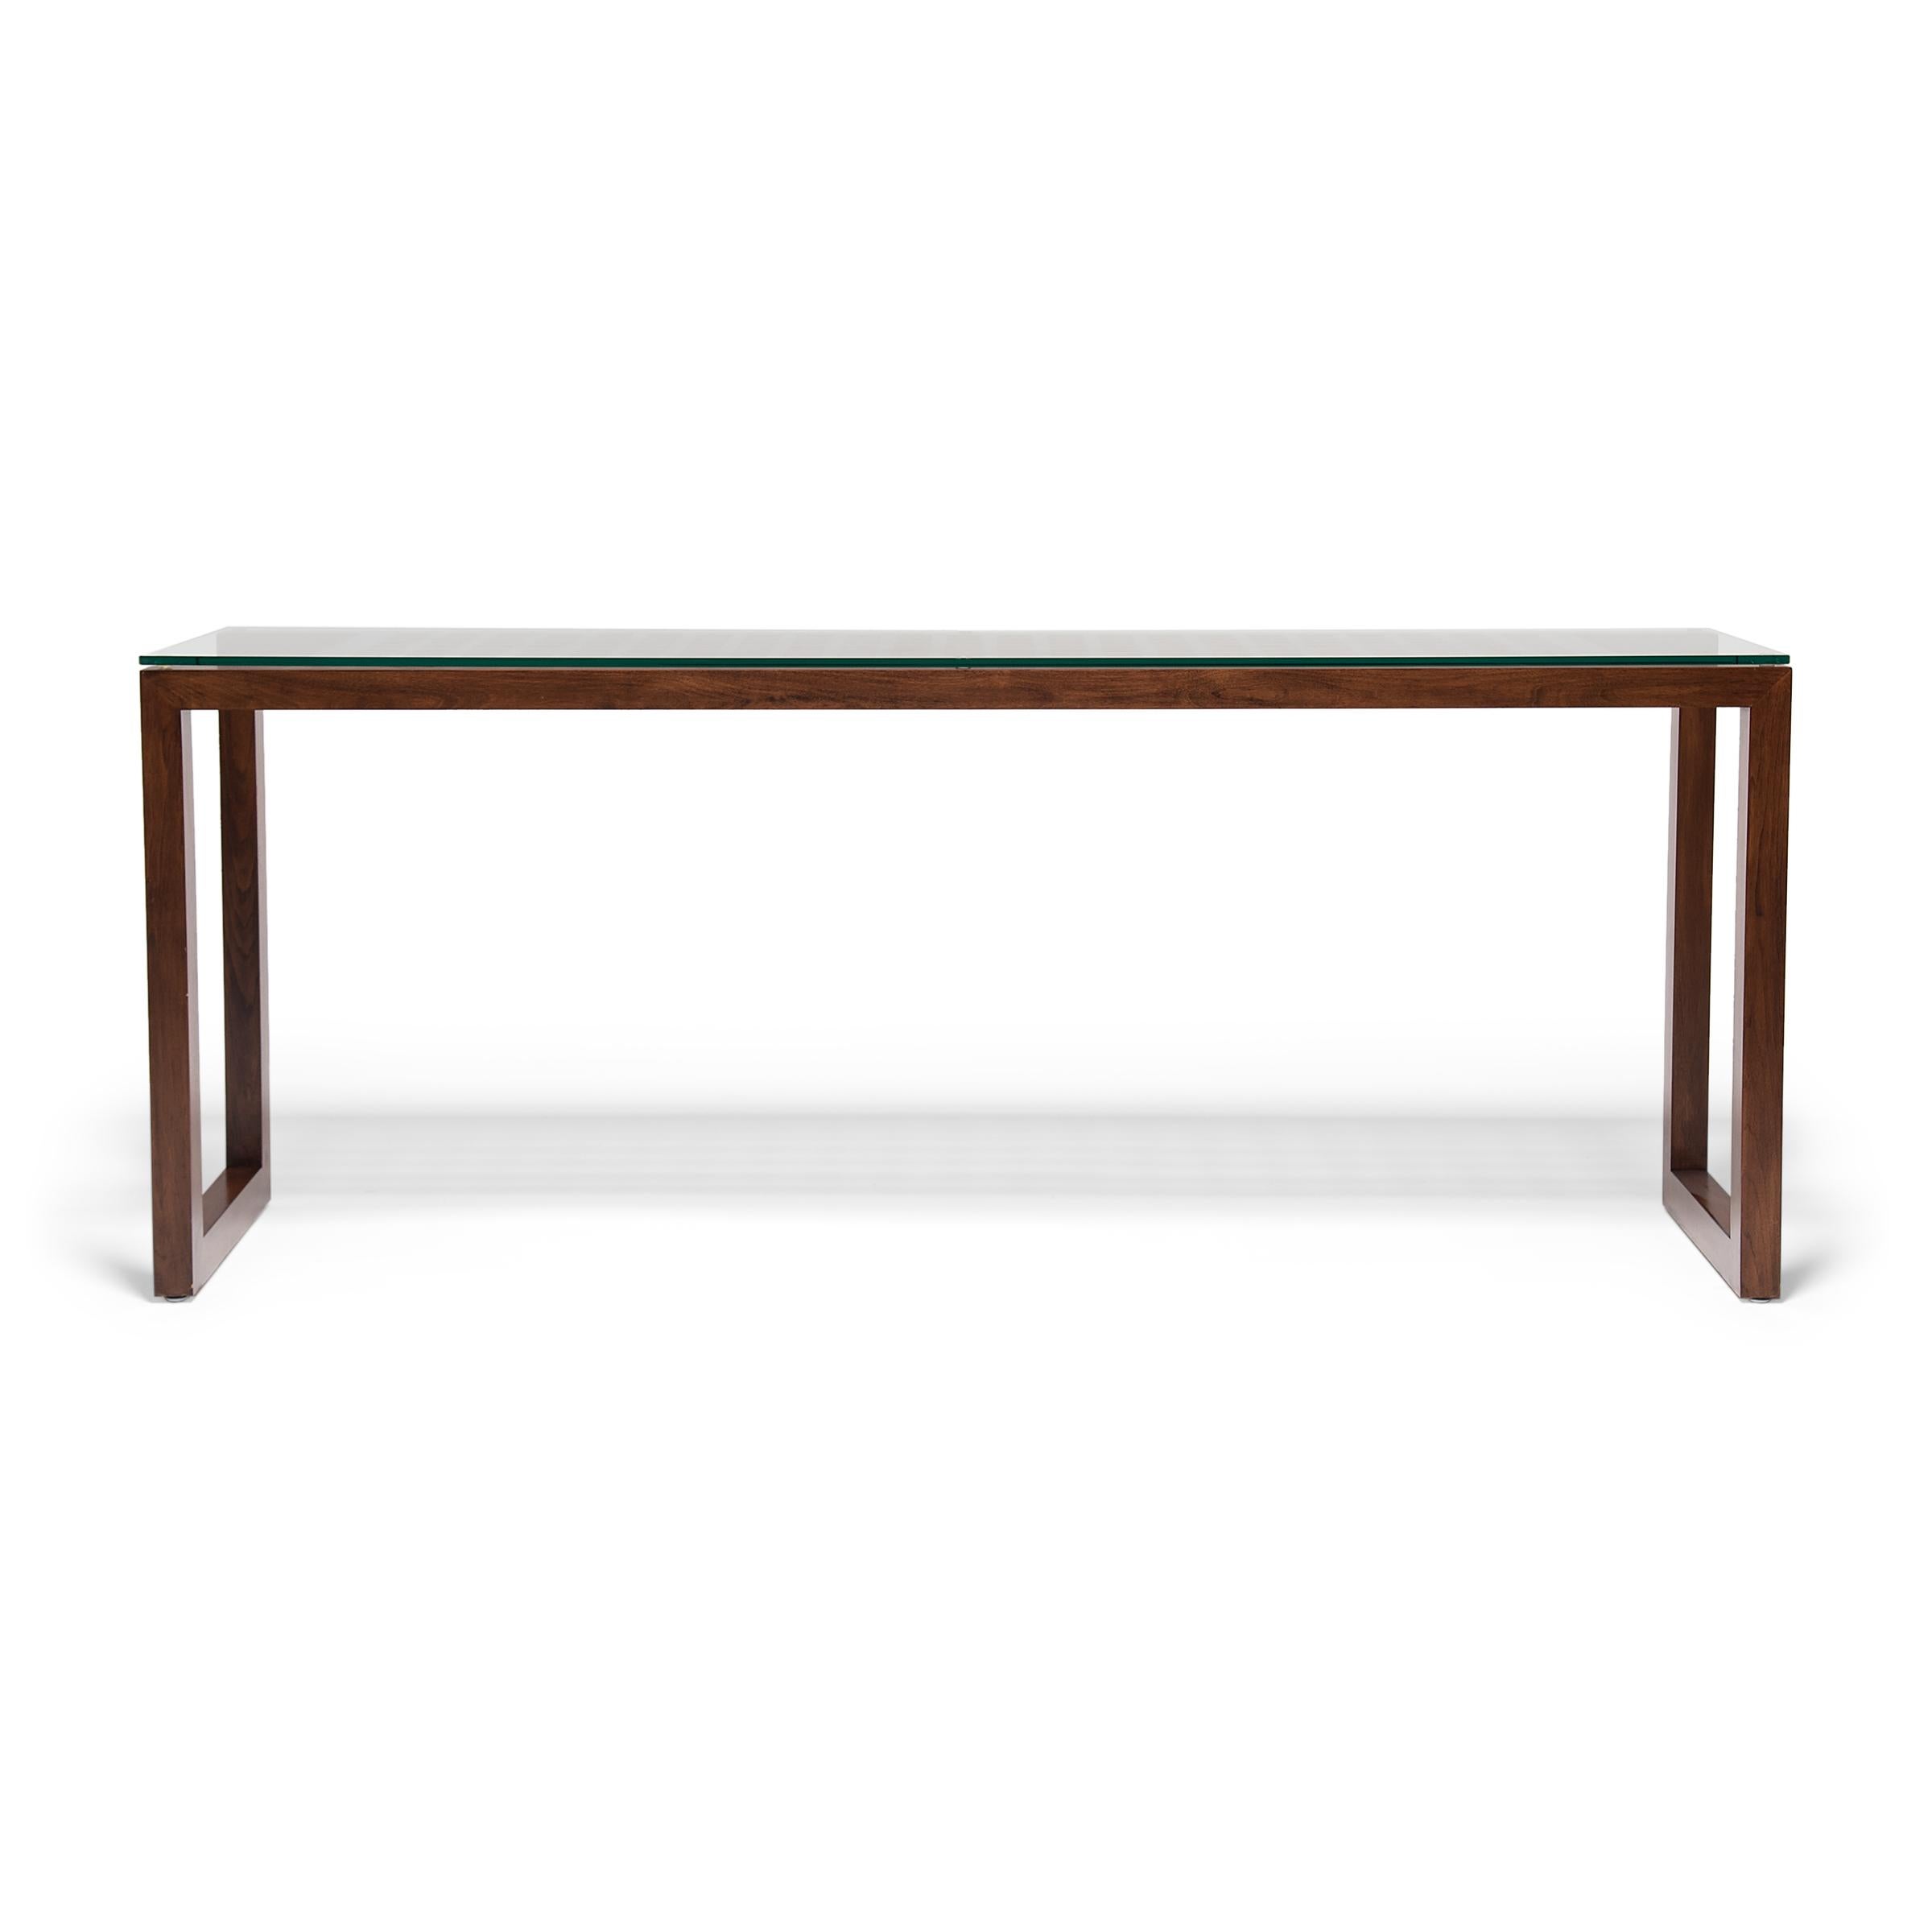 Chinese Lattice Top Waterfall Console Table 2